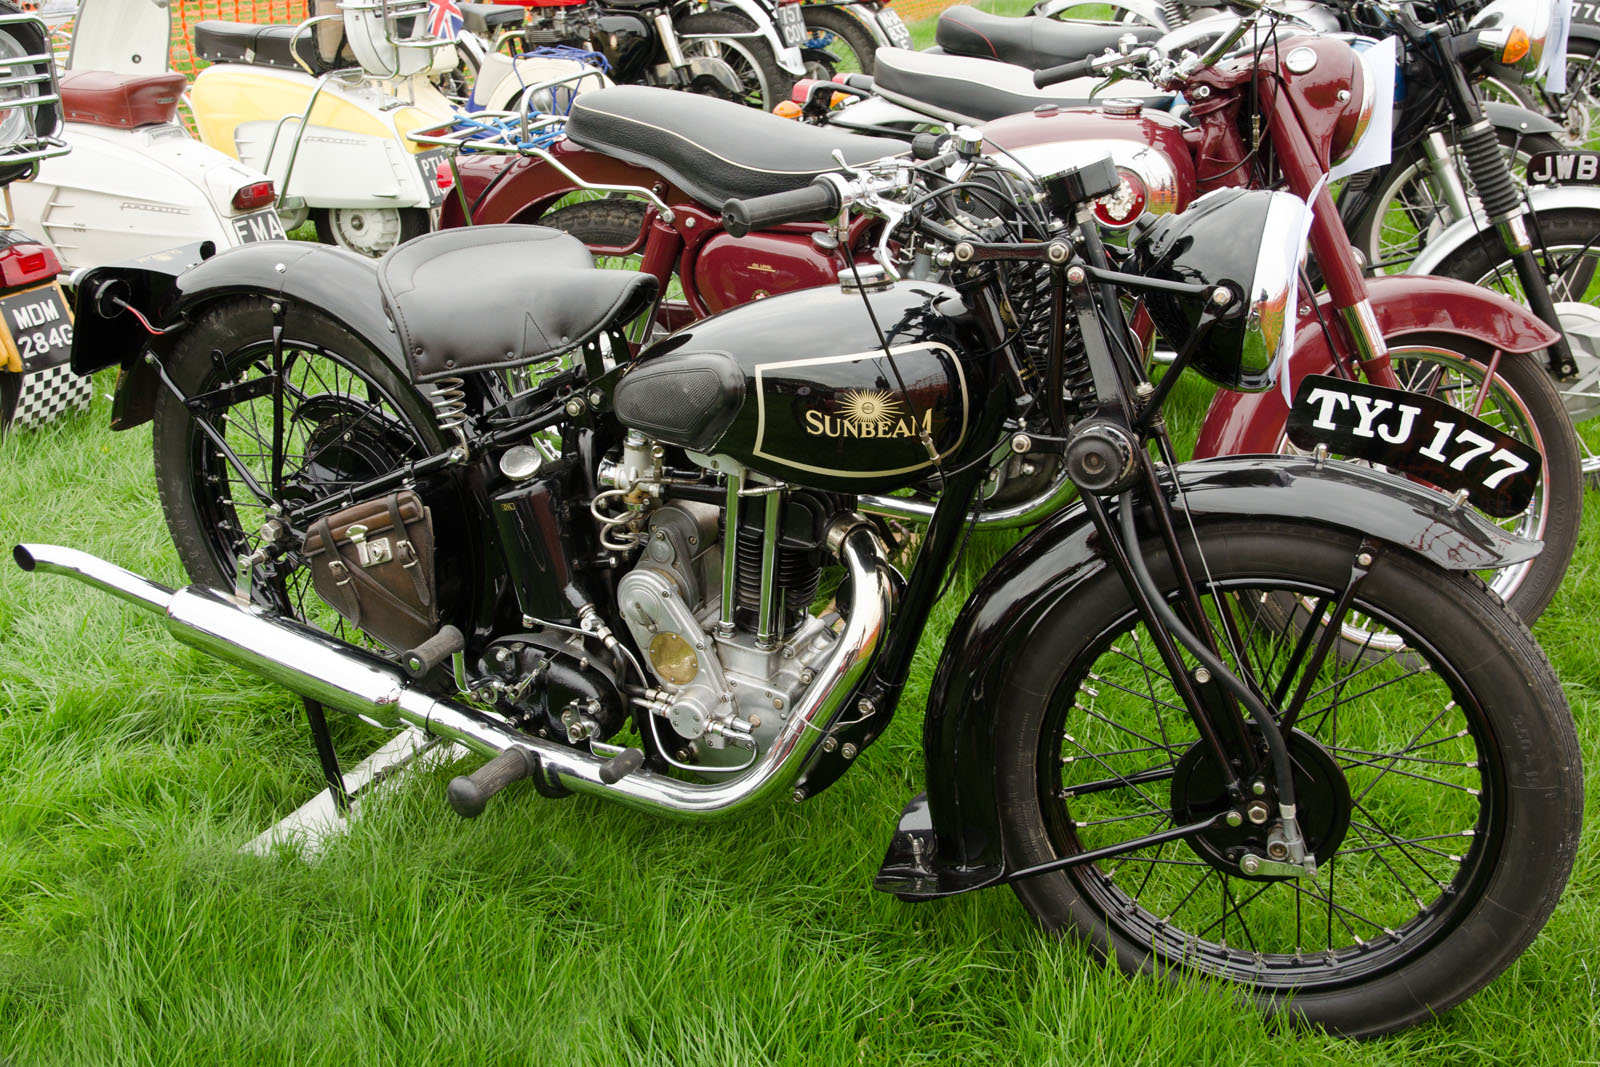 the motorcycles are parked side by side on the grass